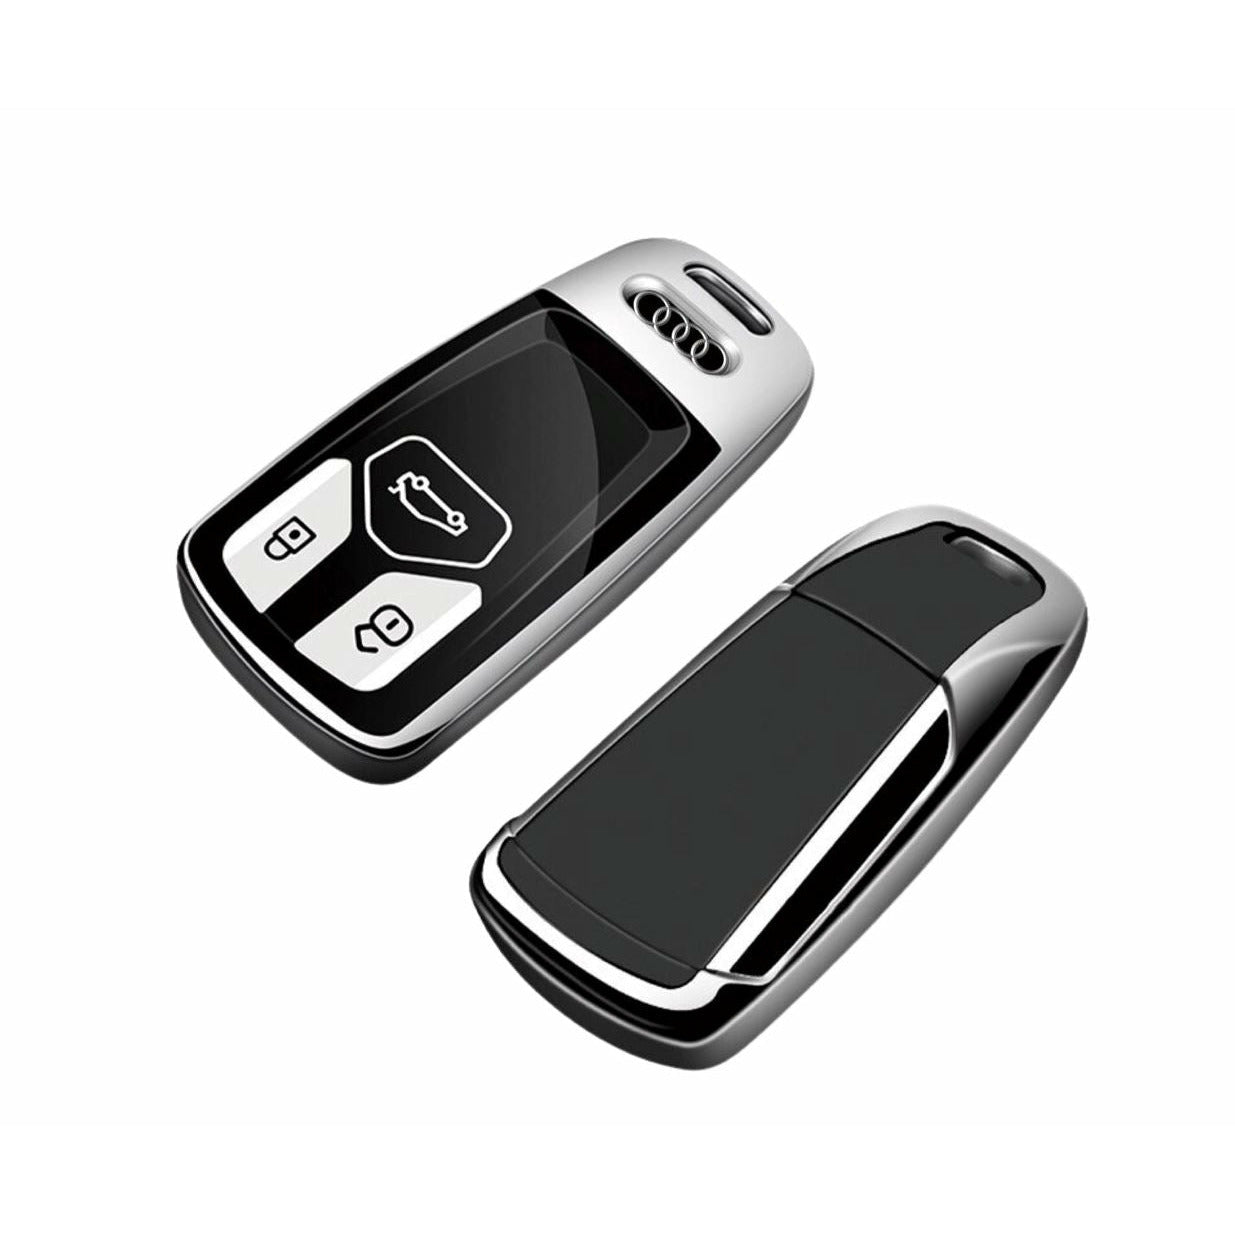 Audi key fob cover - Gloss Silver and black  | Keysleeves